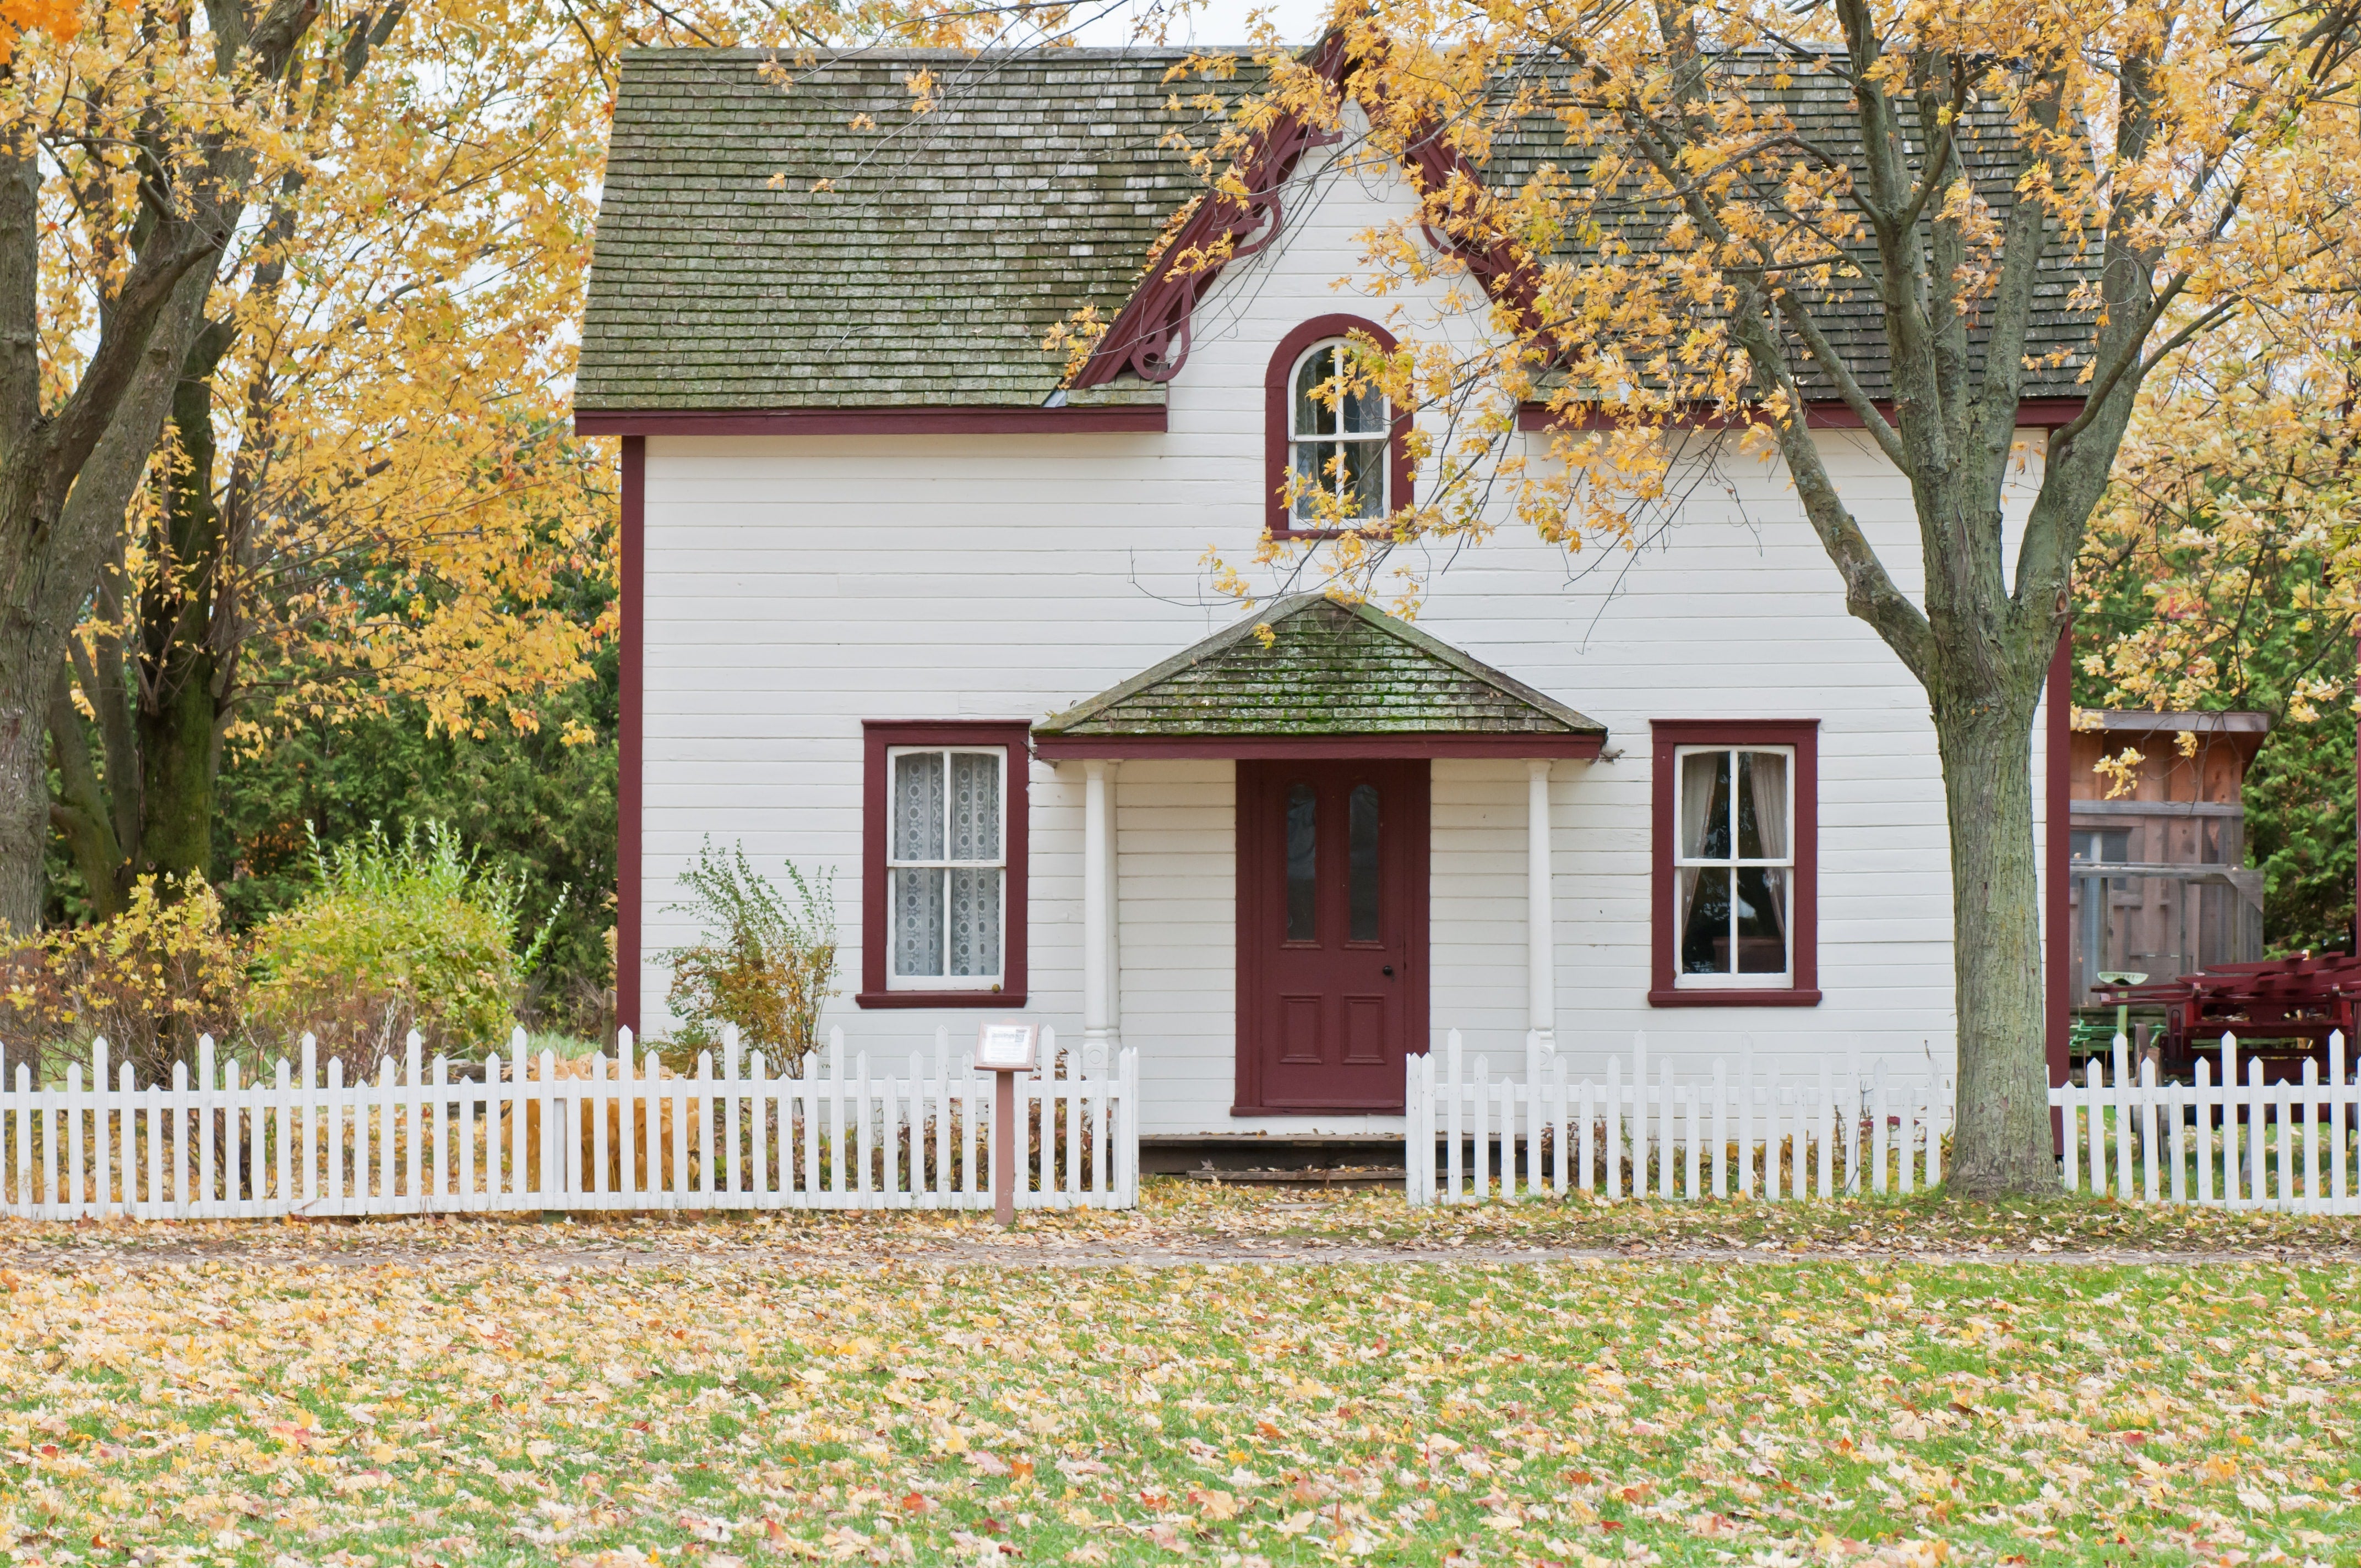 13 Ways to Get Your House Ready for Fall — Inside and Out